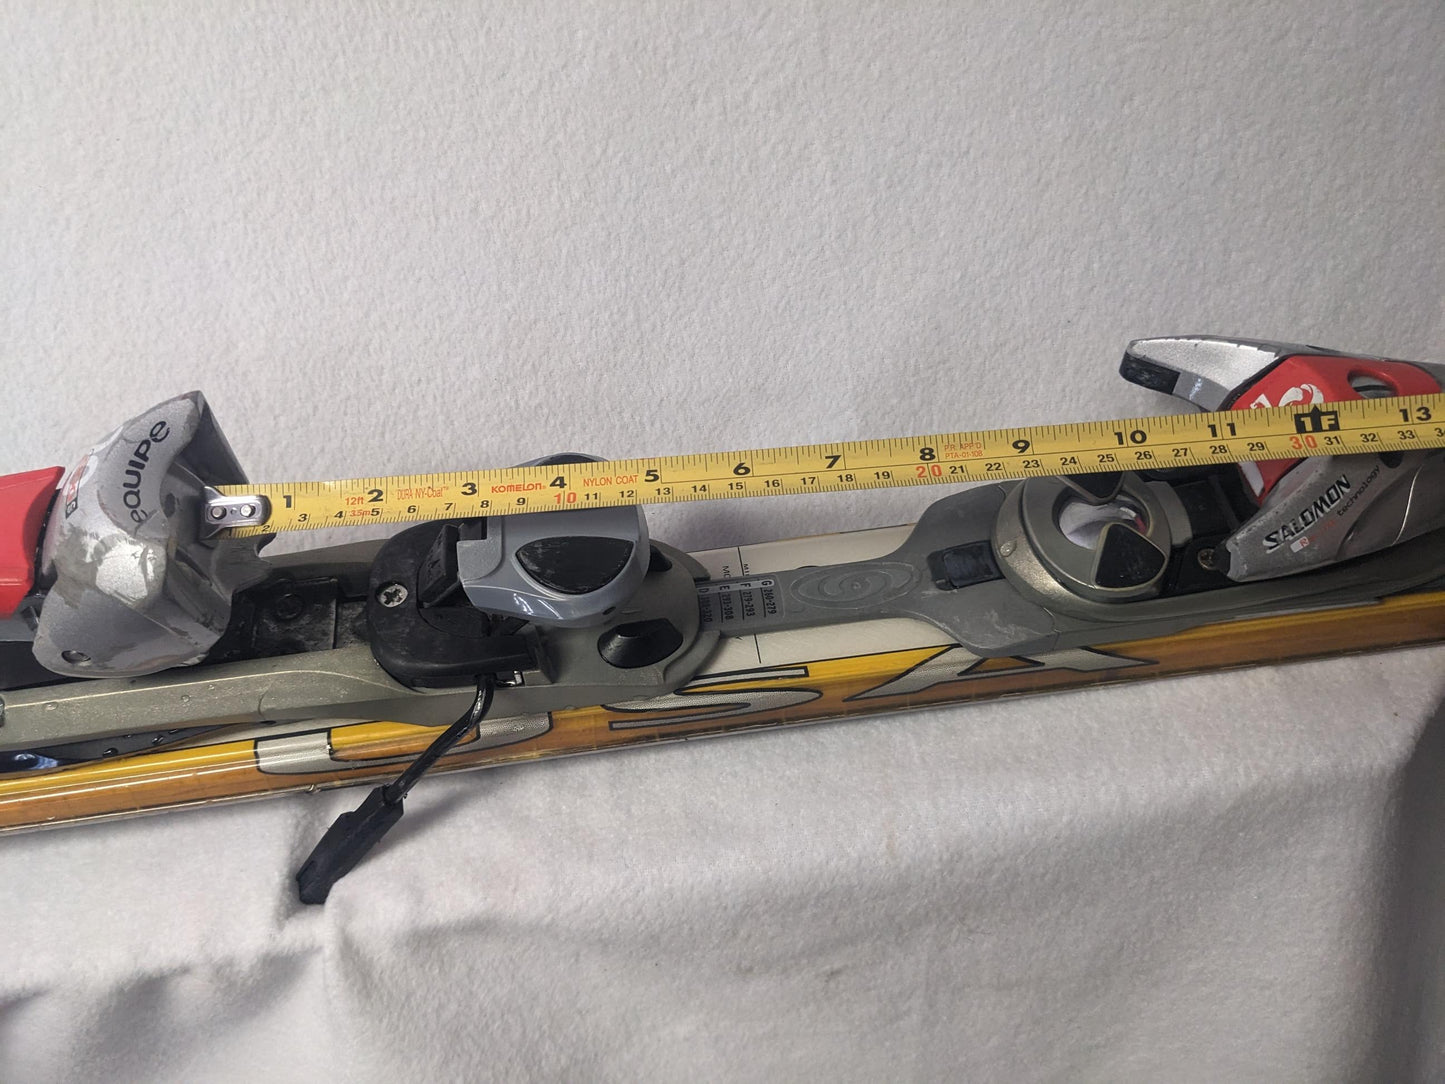 K2 Axis Skis w/Salomon Bindings Size 180 Cm Color Yellow Condition Used